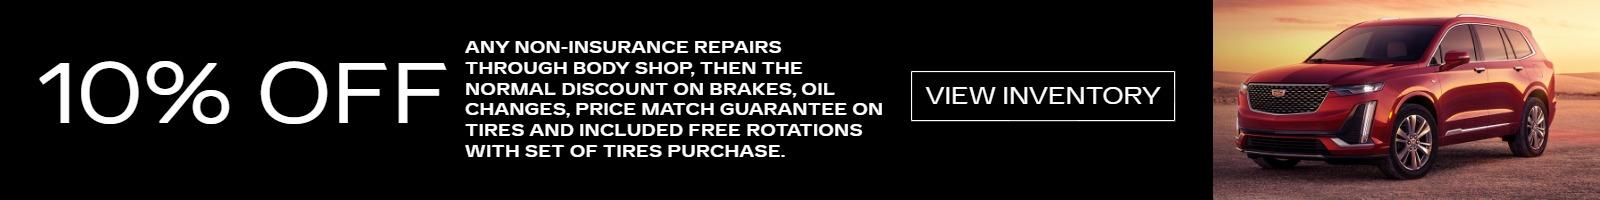 ANY NON-INSURANCE REPAIRS THROUGH BODY SHOP, THEN THE NORMAL DISCOUNT ON BRAKES, OIL CHANGES, PRICE MATCH GUARANTEE ON TIRES AND INCLUDED FREE ROTATIONS WITH SET OF TIRES PURCHASE.